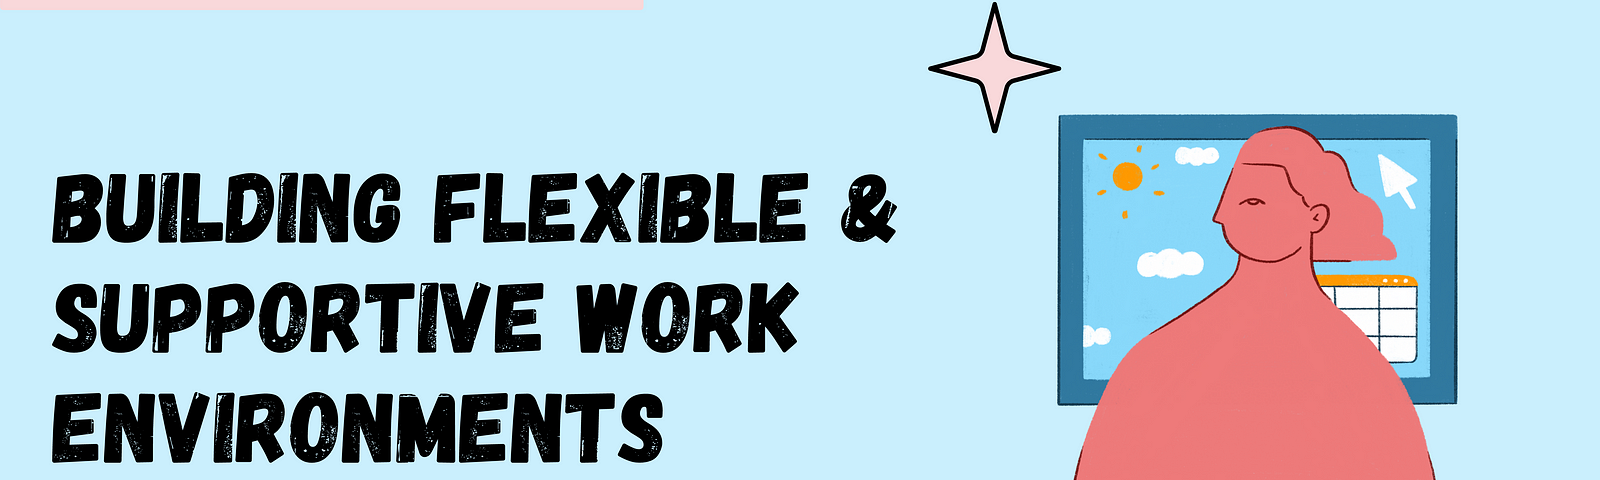 Light blue background with the heading text, “Building Flexible & Supportive Work Environments”. Top left red box says, “Aleria’s 9 Categories of Inclusion”. Illustration of a person on the right against a rectangle with a calendar on the right side and the sky on the left side.